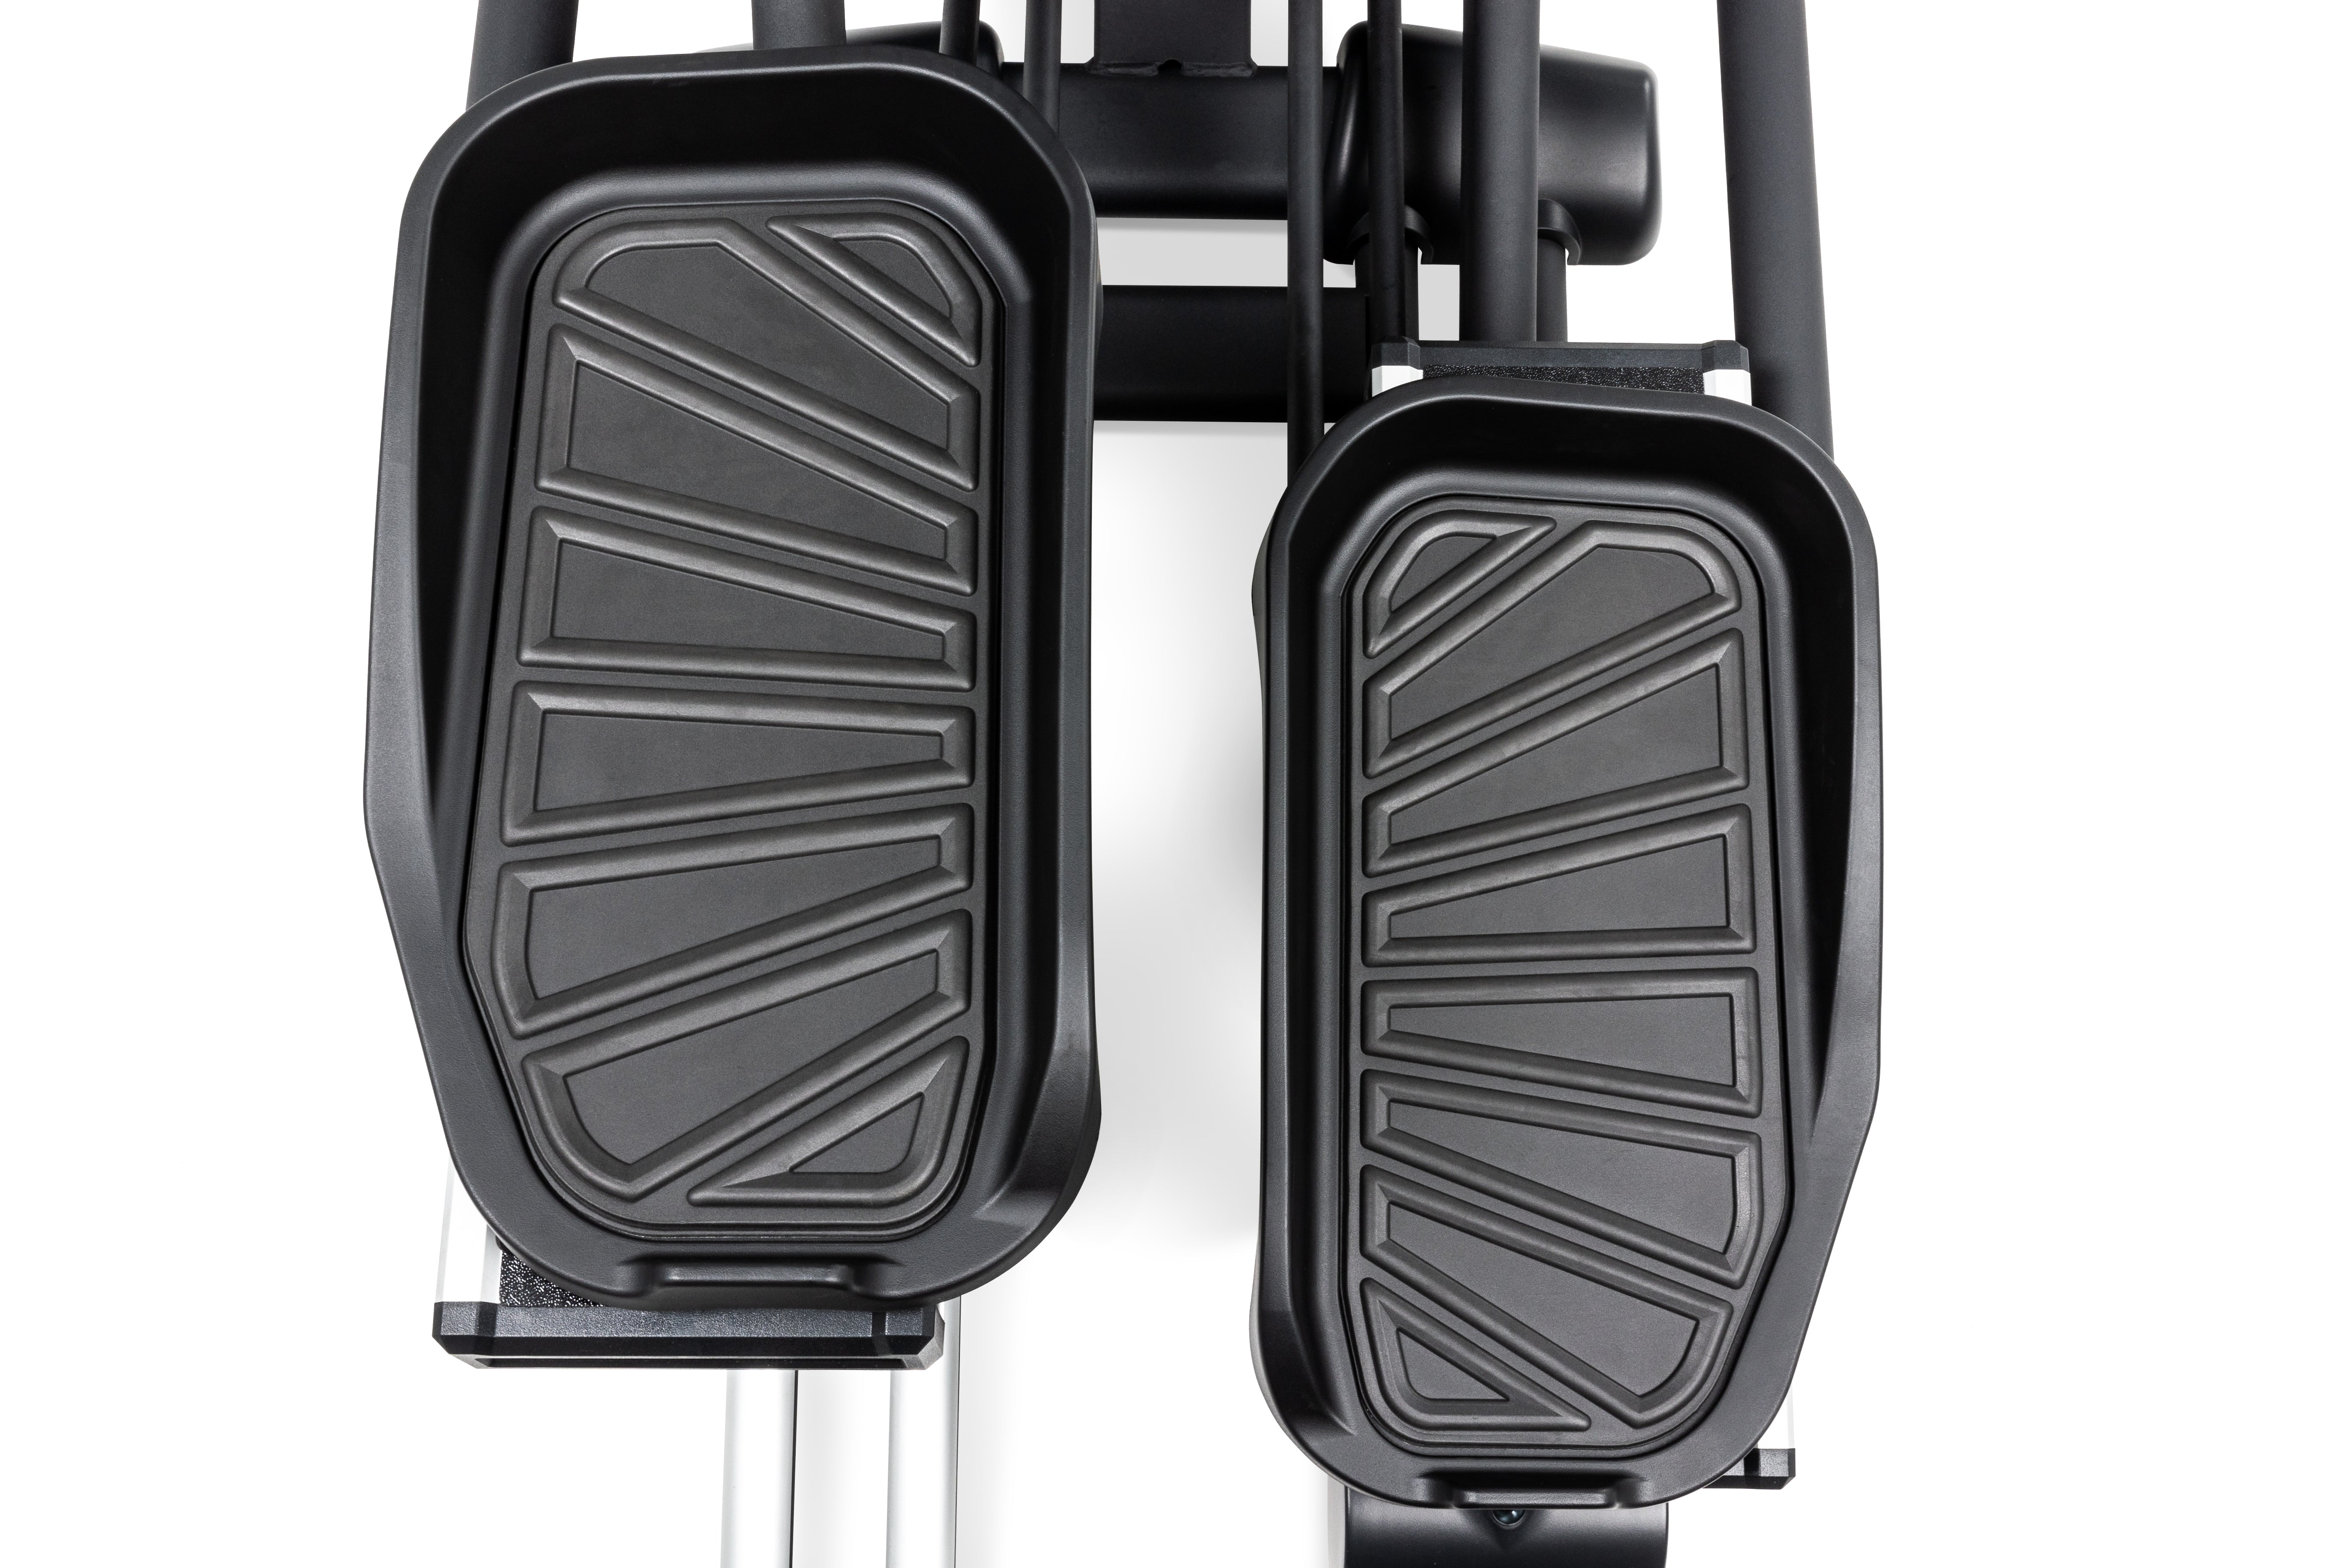 Close-up view of the textured foot pedals of the Sole E95S elliptical machine.